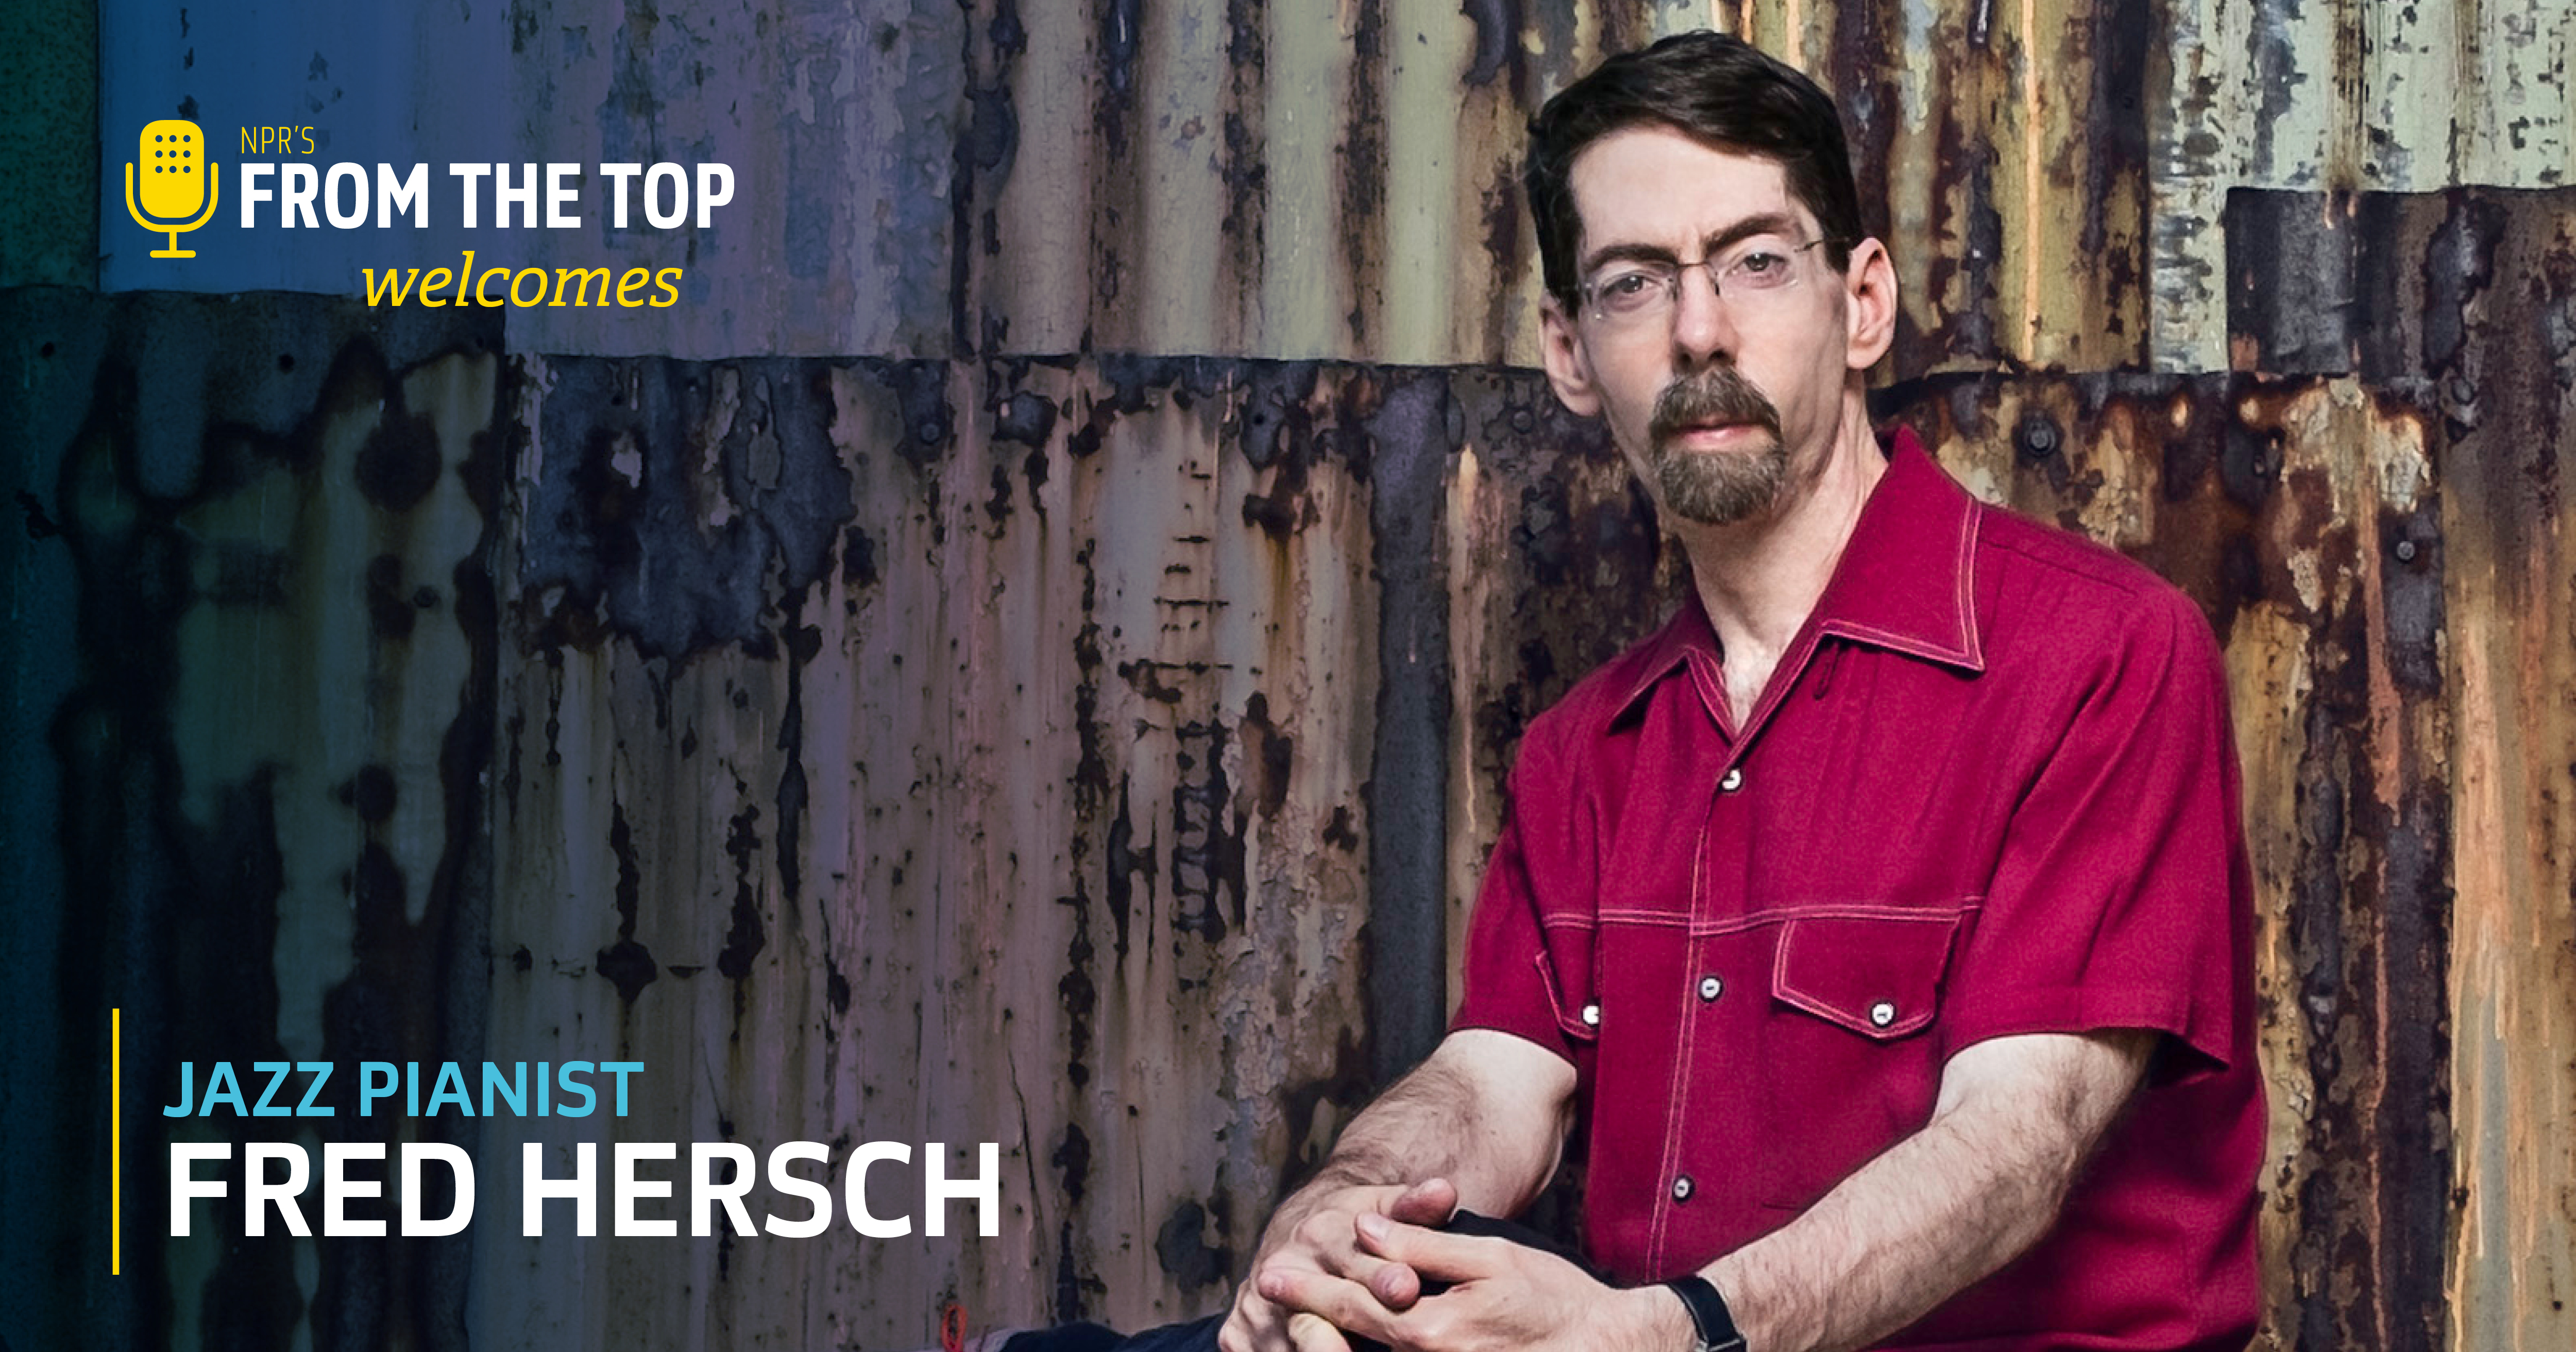 Fred Hersch joins NPR's From the Top as guest artist